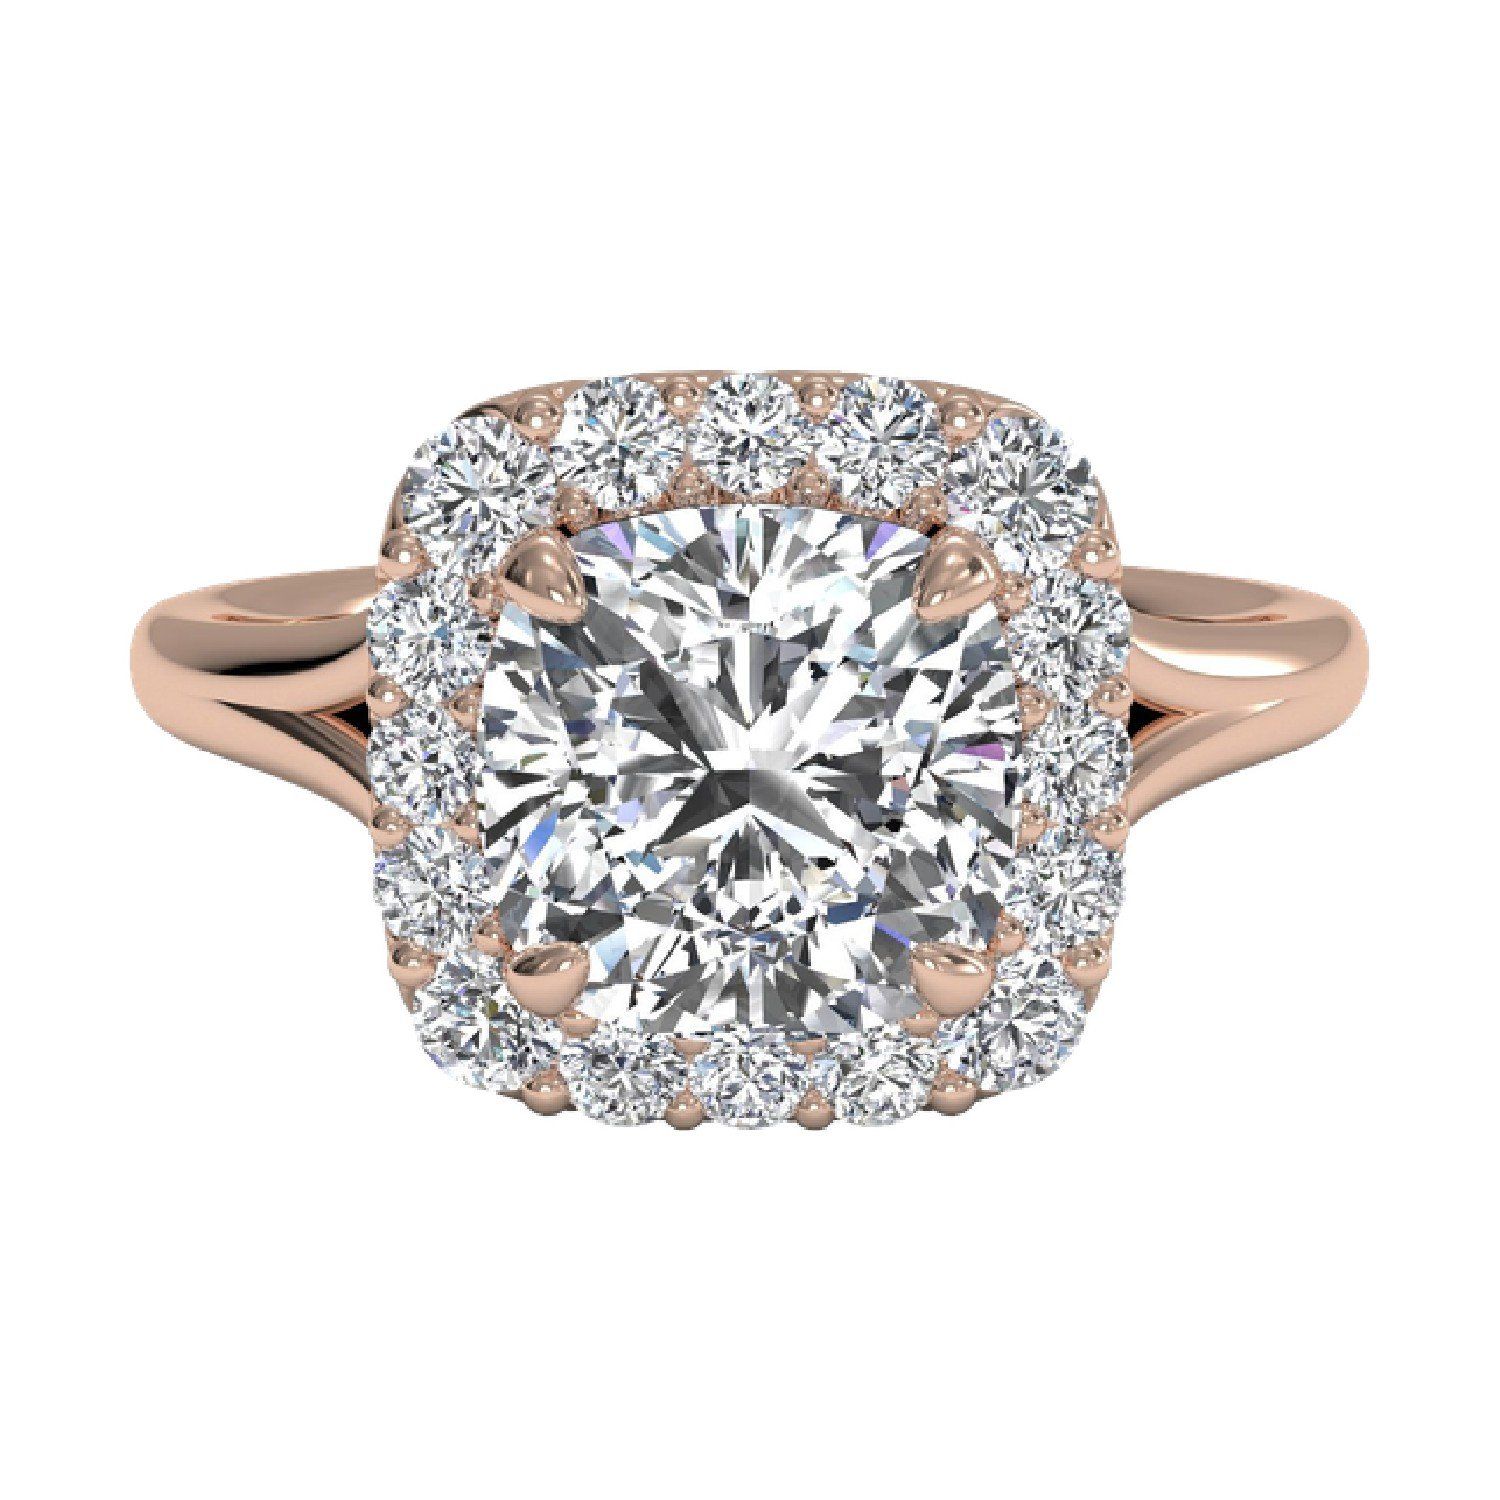 Rose gold engagement ring with a french-set diamond halo